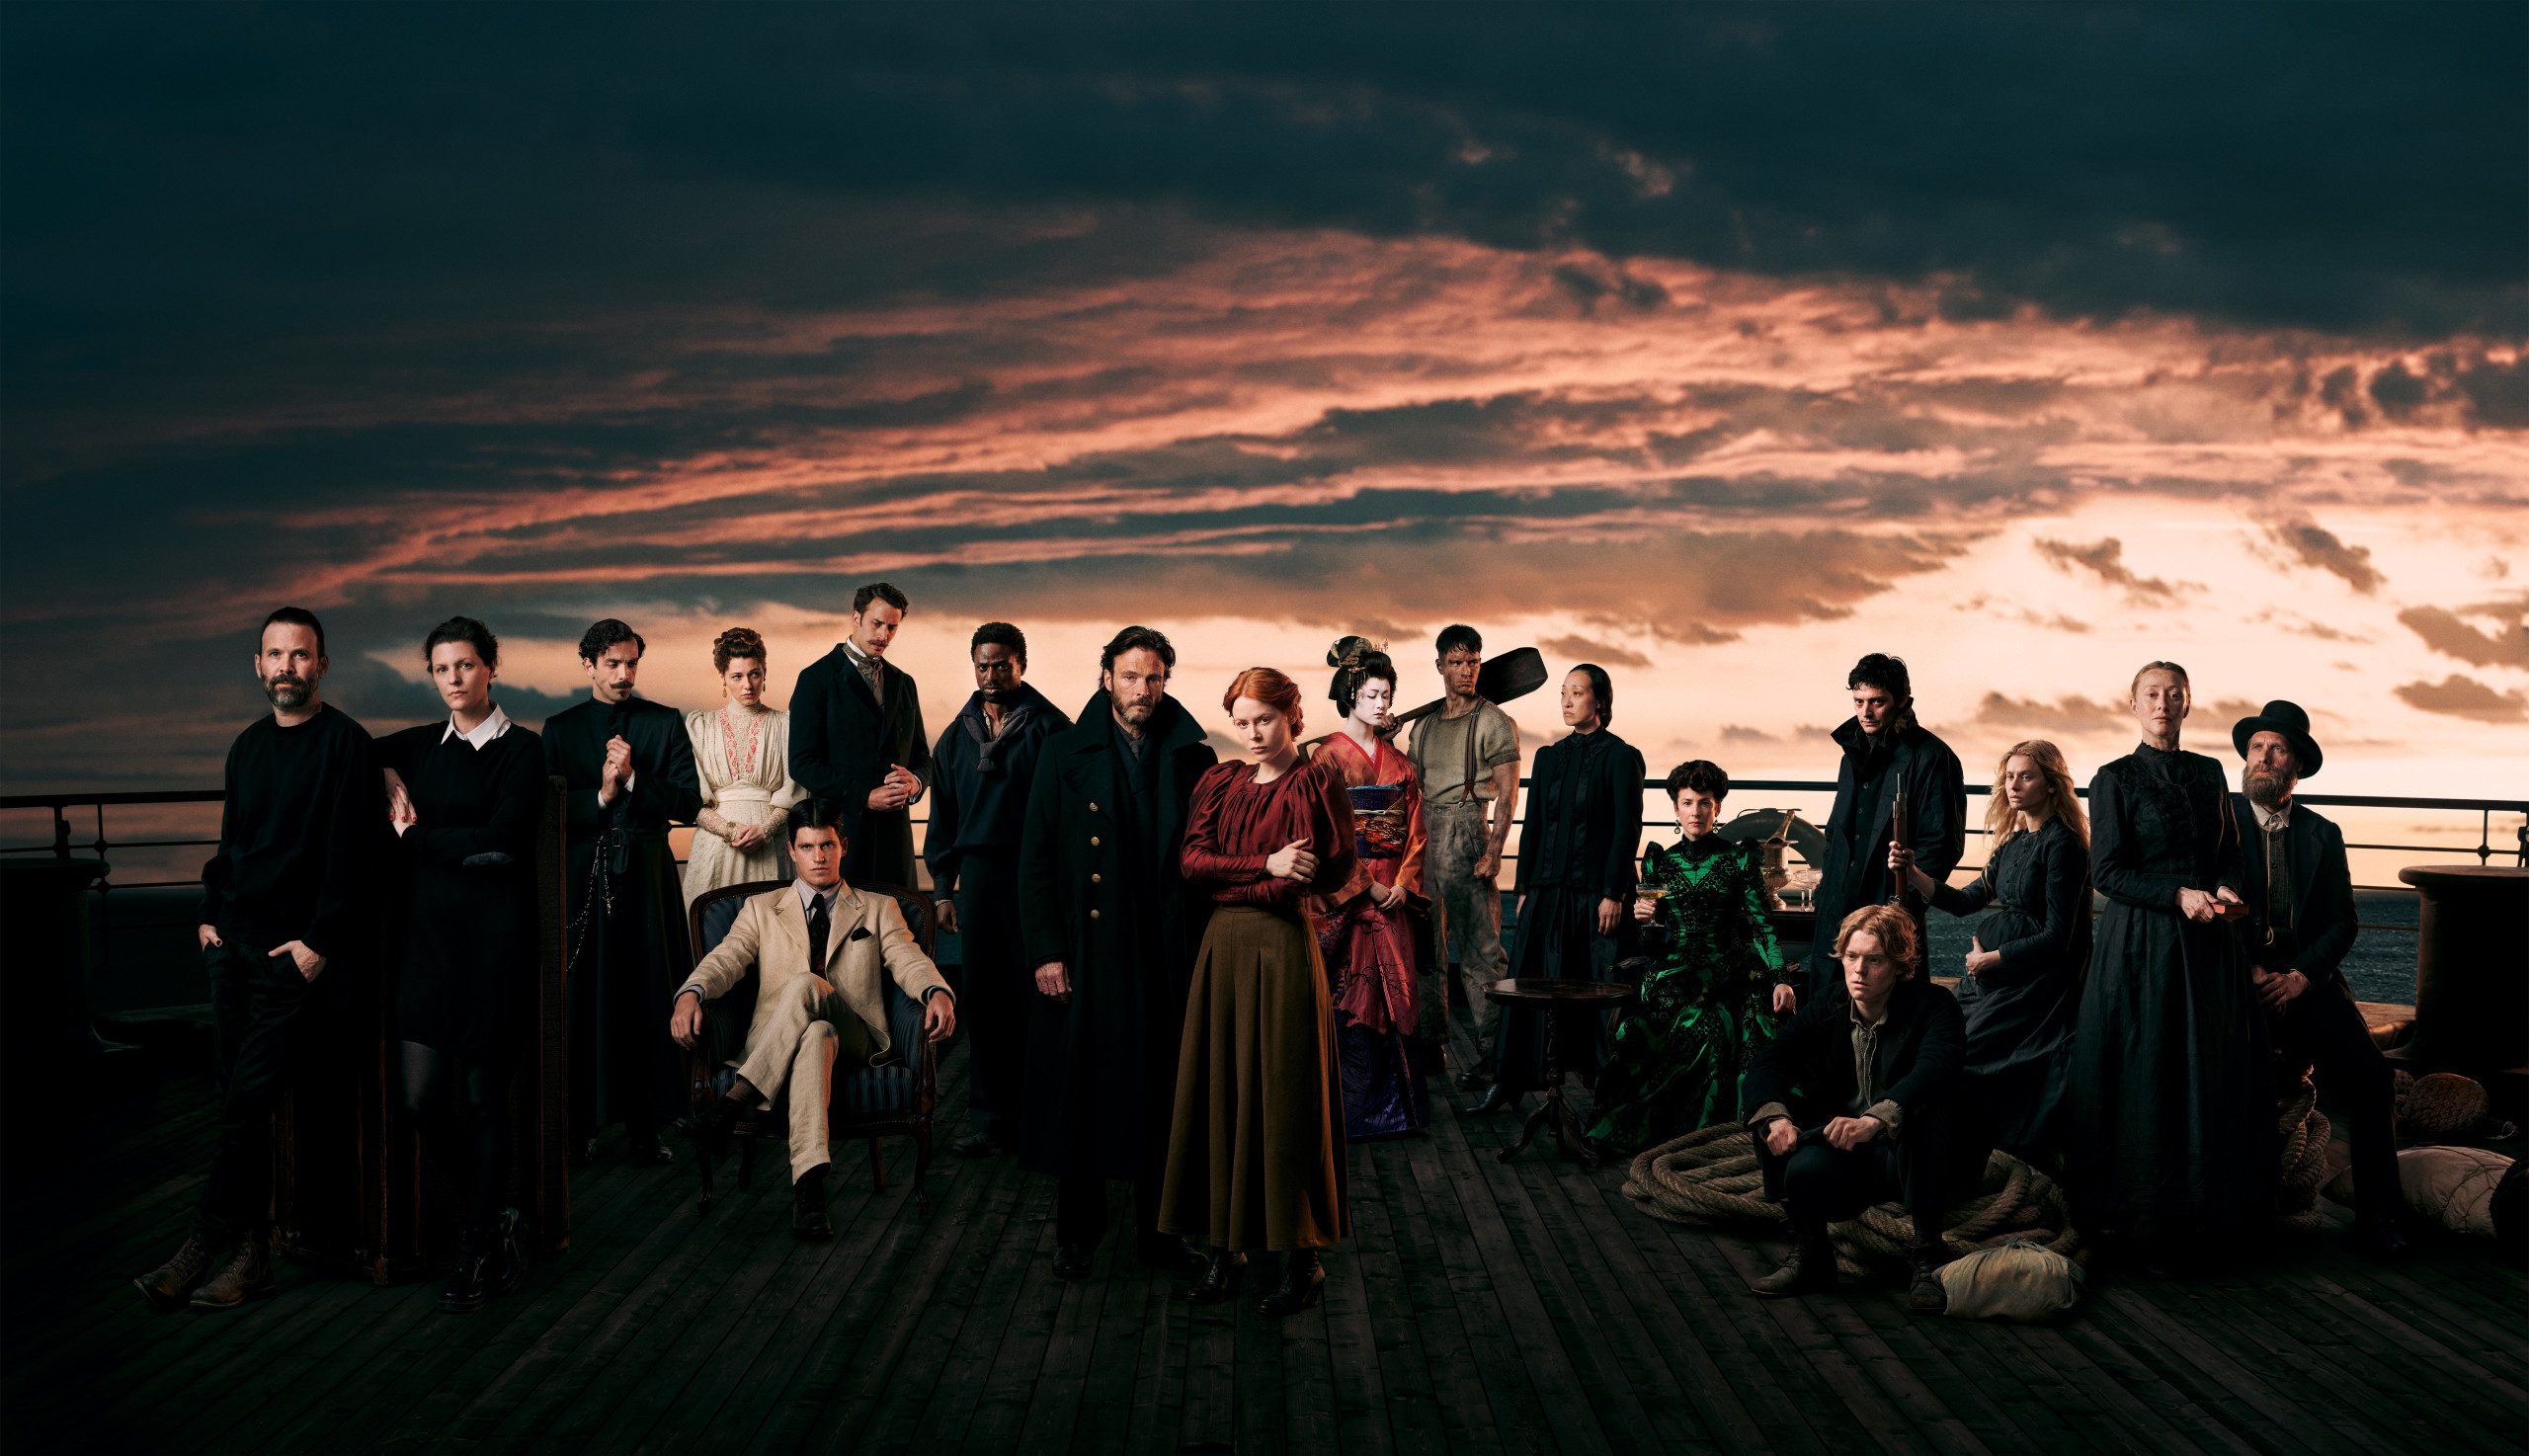 1899 Cast - Every Actor and Character in the Netflix Series